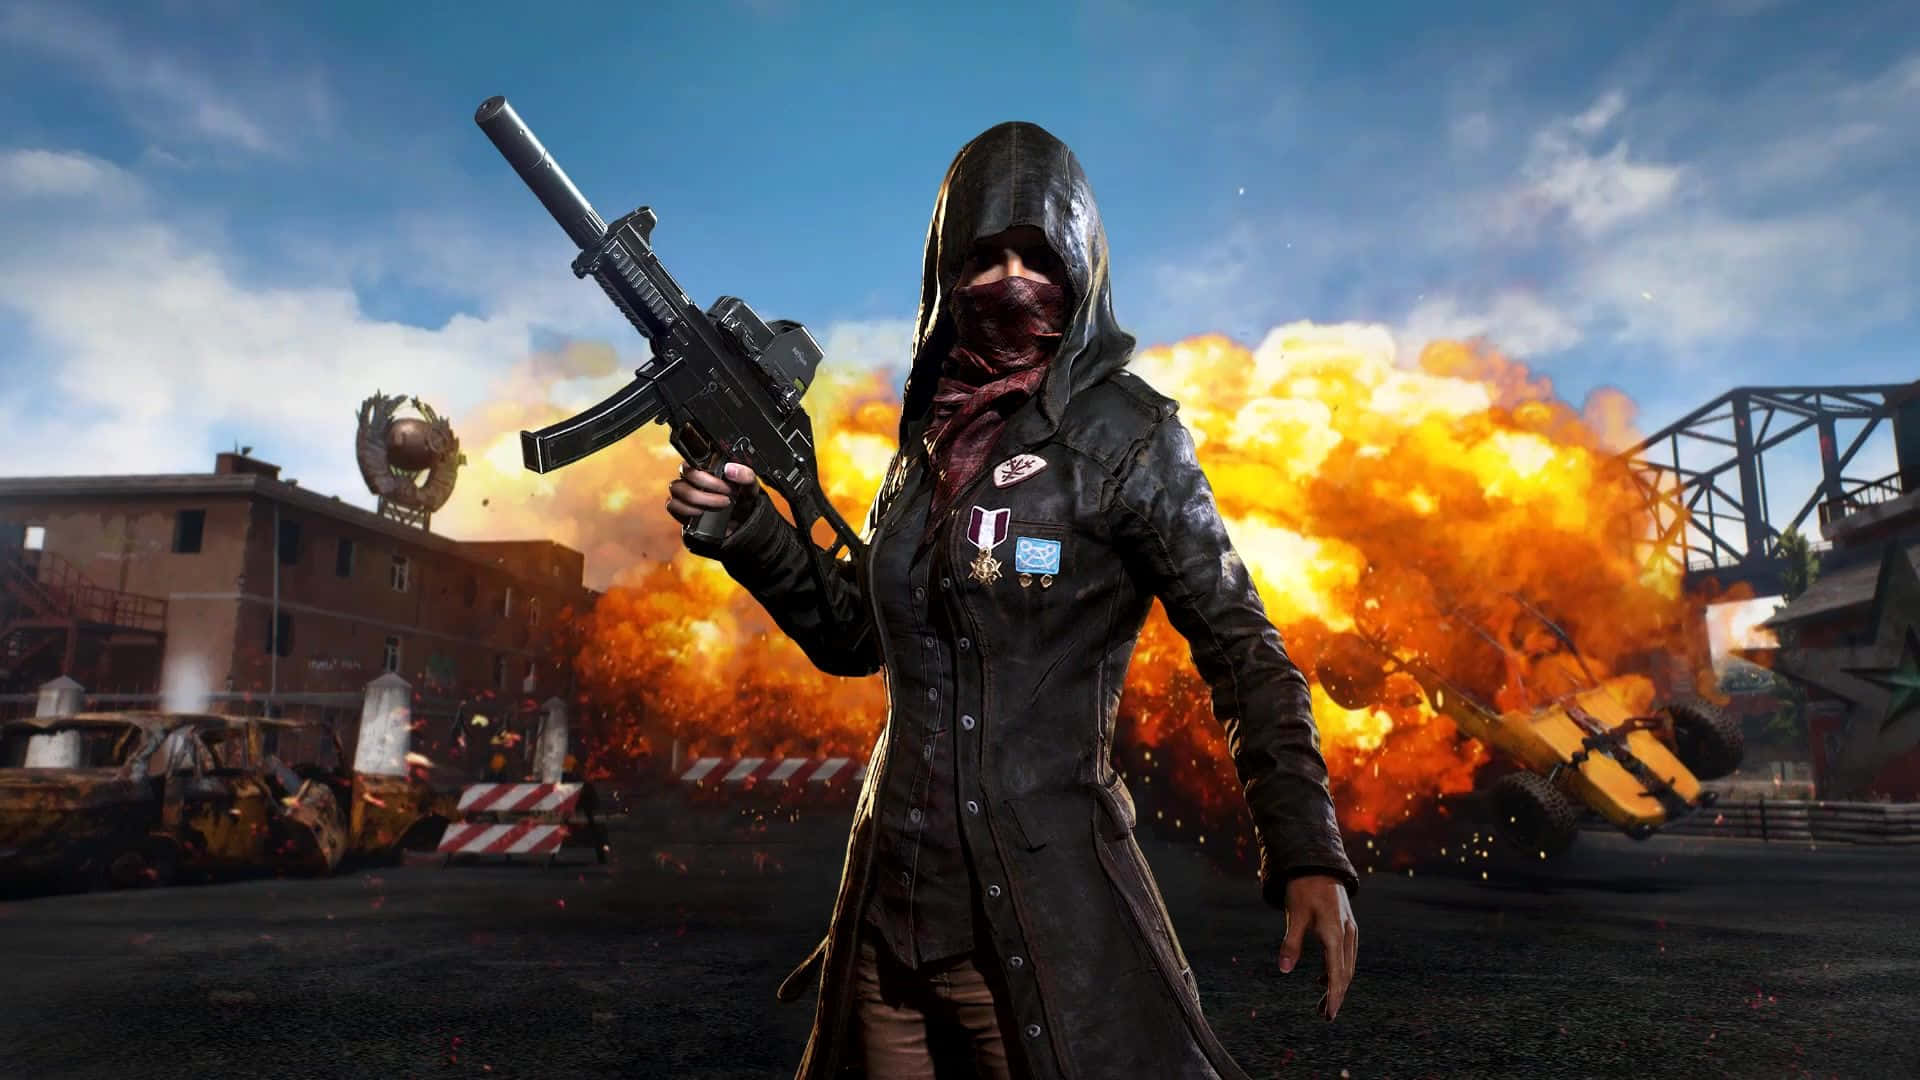 Player Unknown Battlegrounds Hooded Girl Explosion Wallpaper